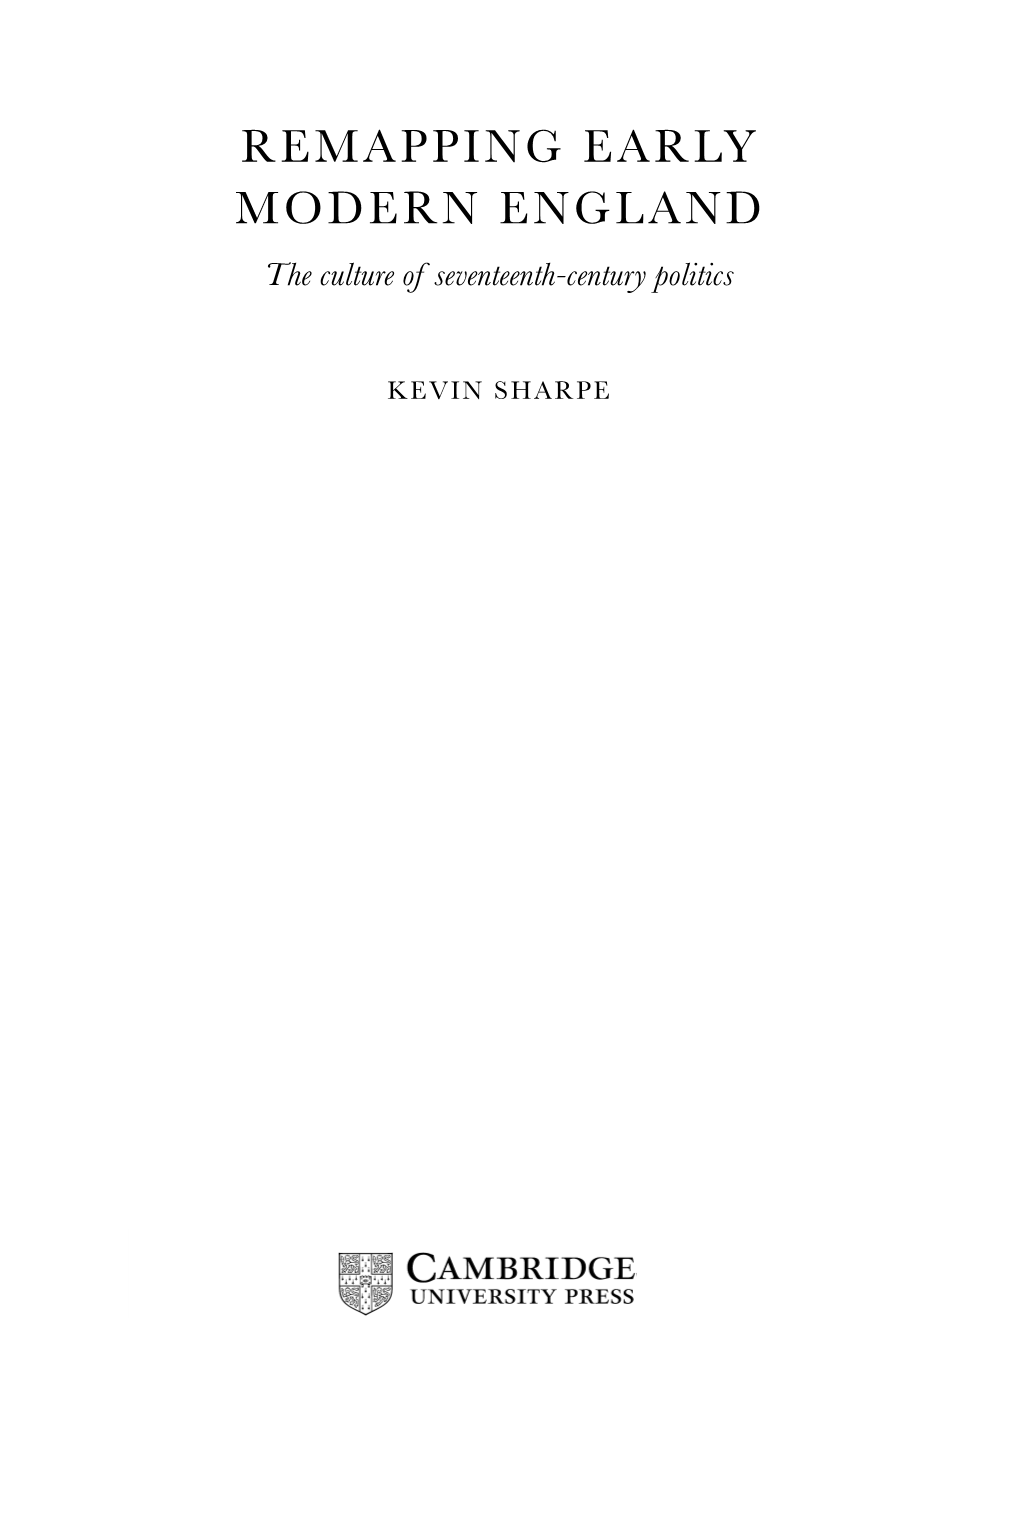 REMAPPING EARLY MODERN ENGLAND the Culture of Seventeenth-Century Politics